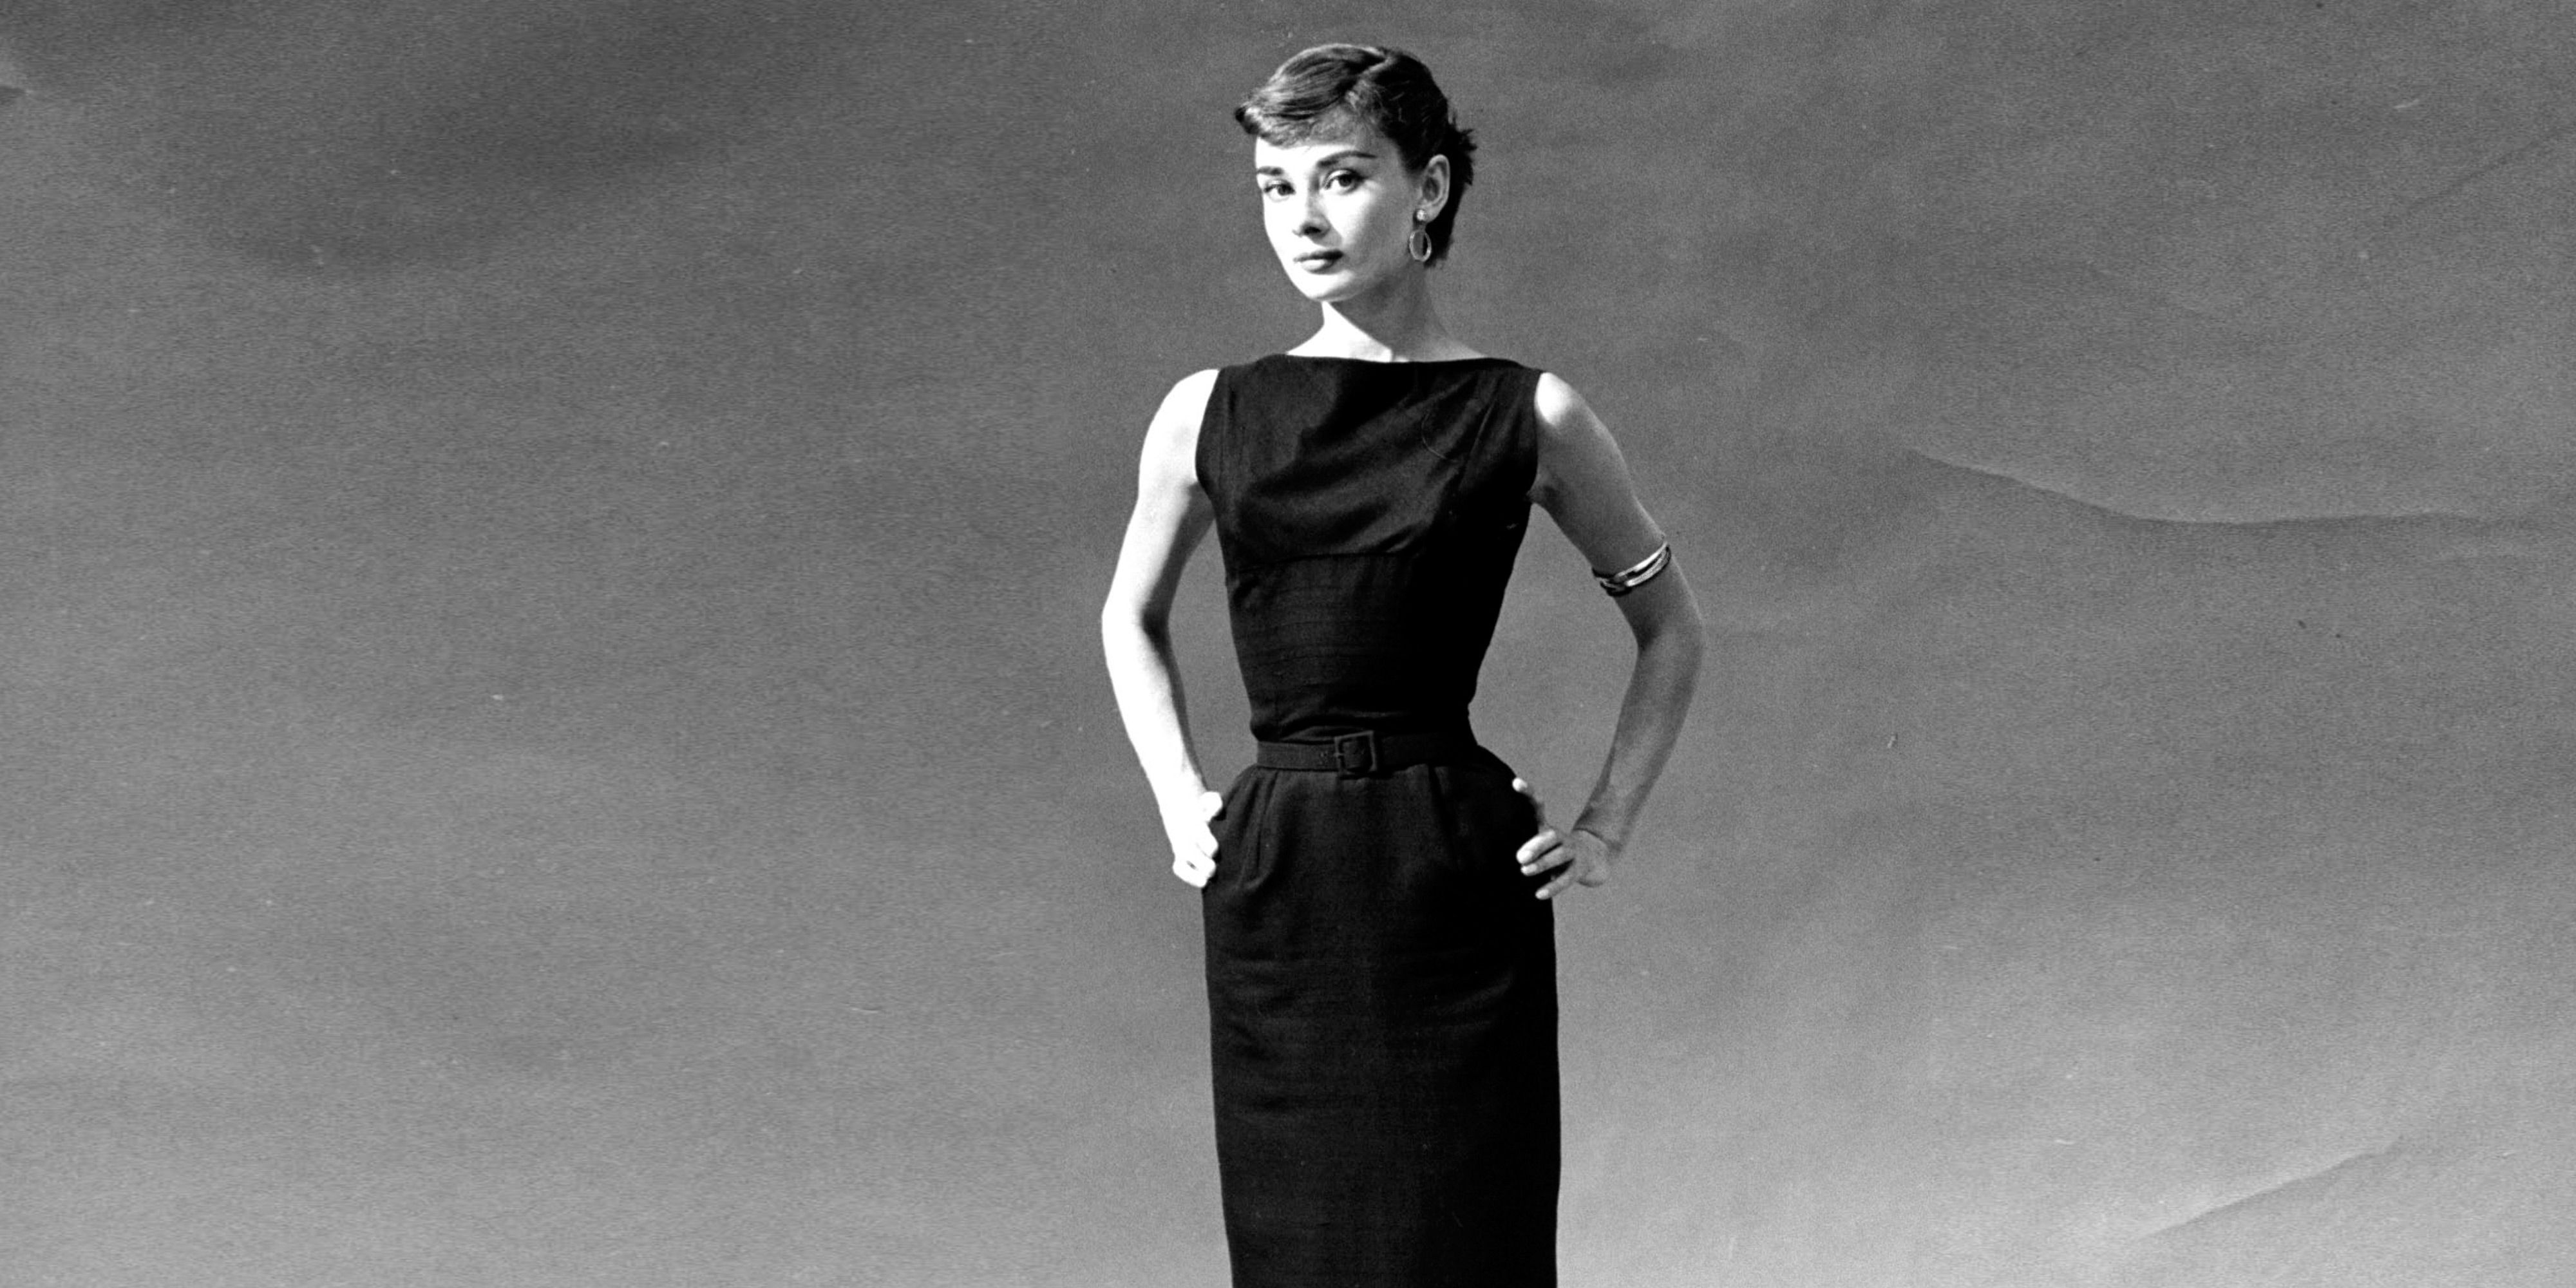 97 Audrey Hepburn Quotes About Life and Happiness - Inspirationfeed